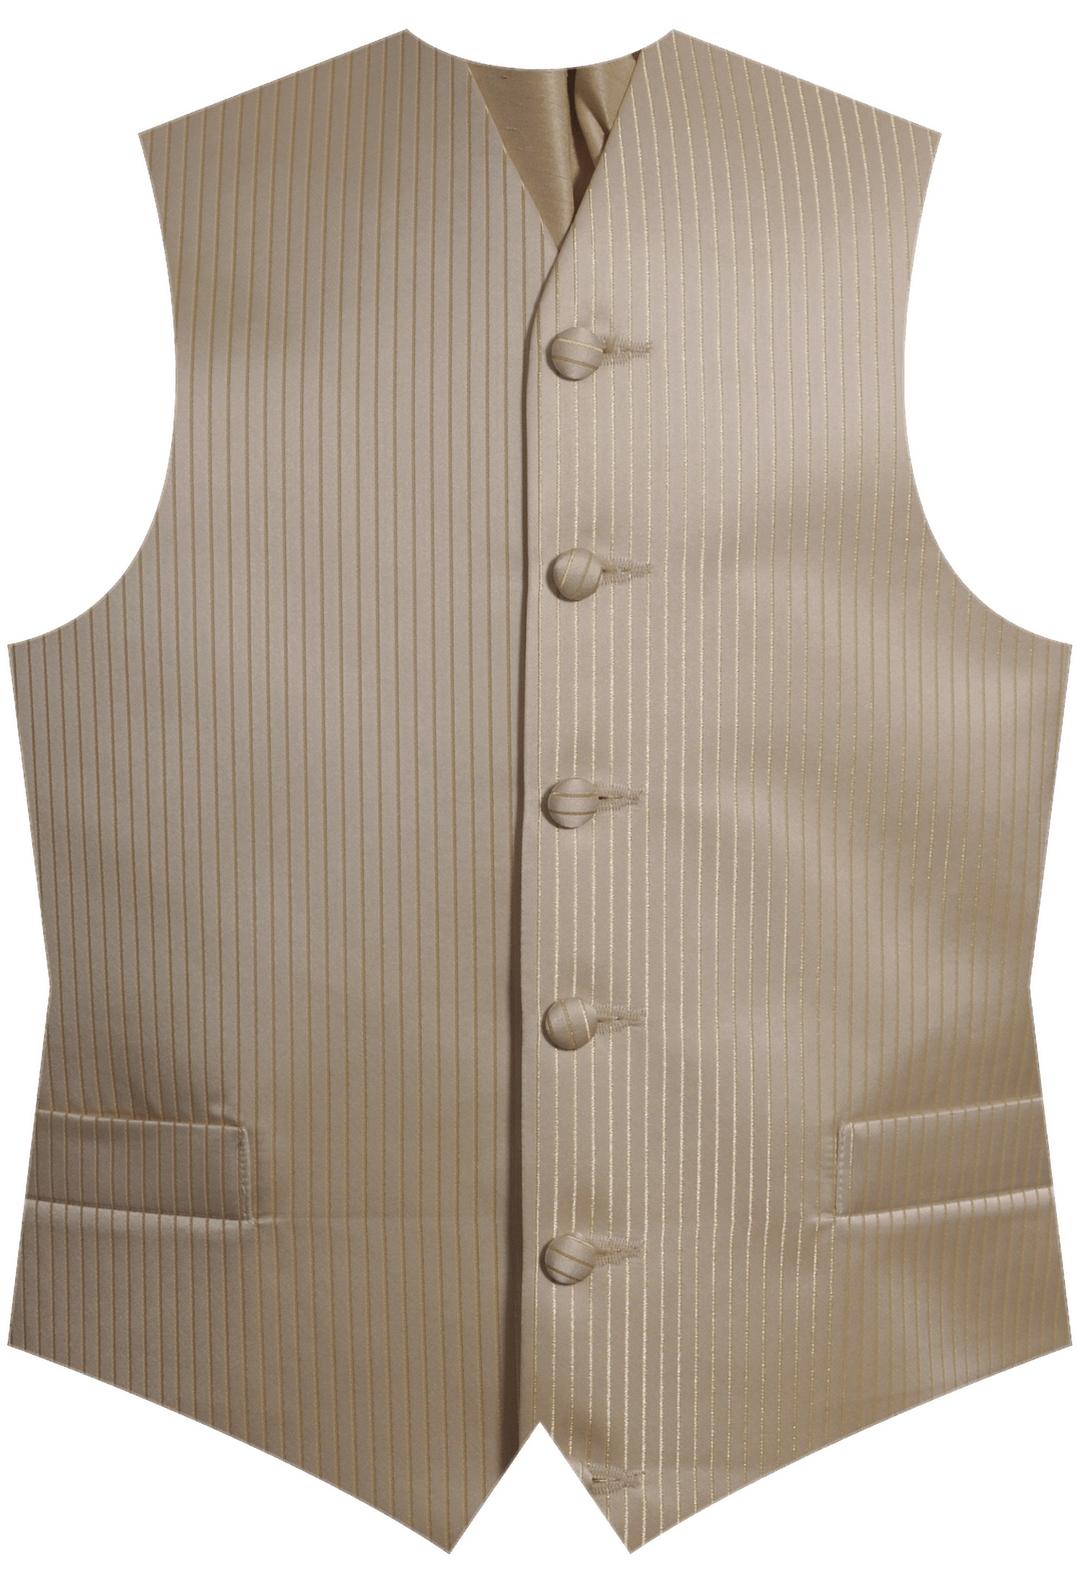 Wedding Waistcoat With Closed Buttons png transparent